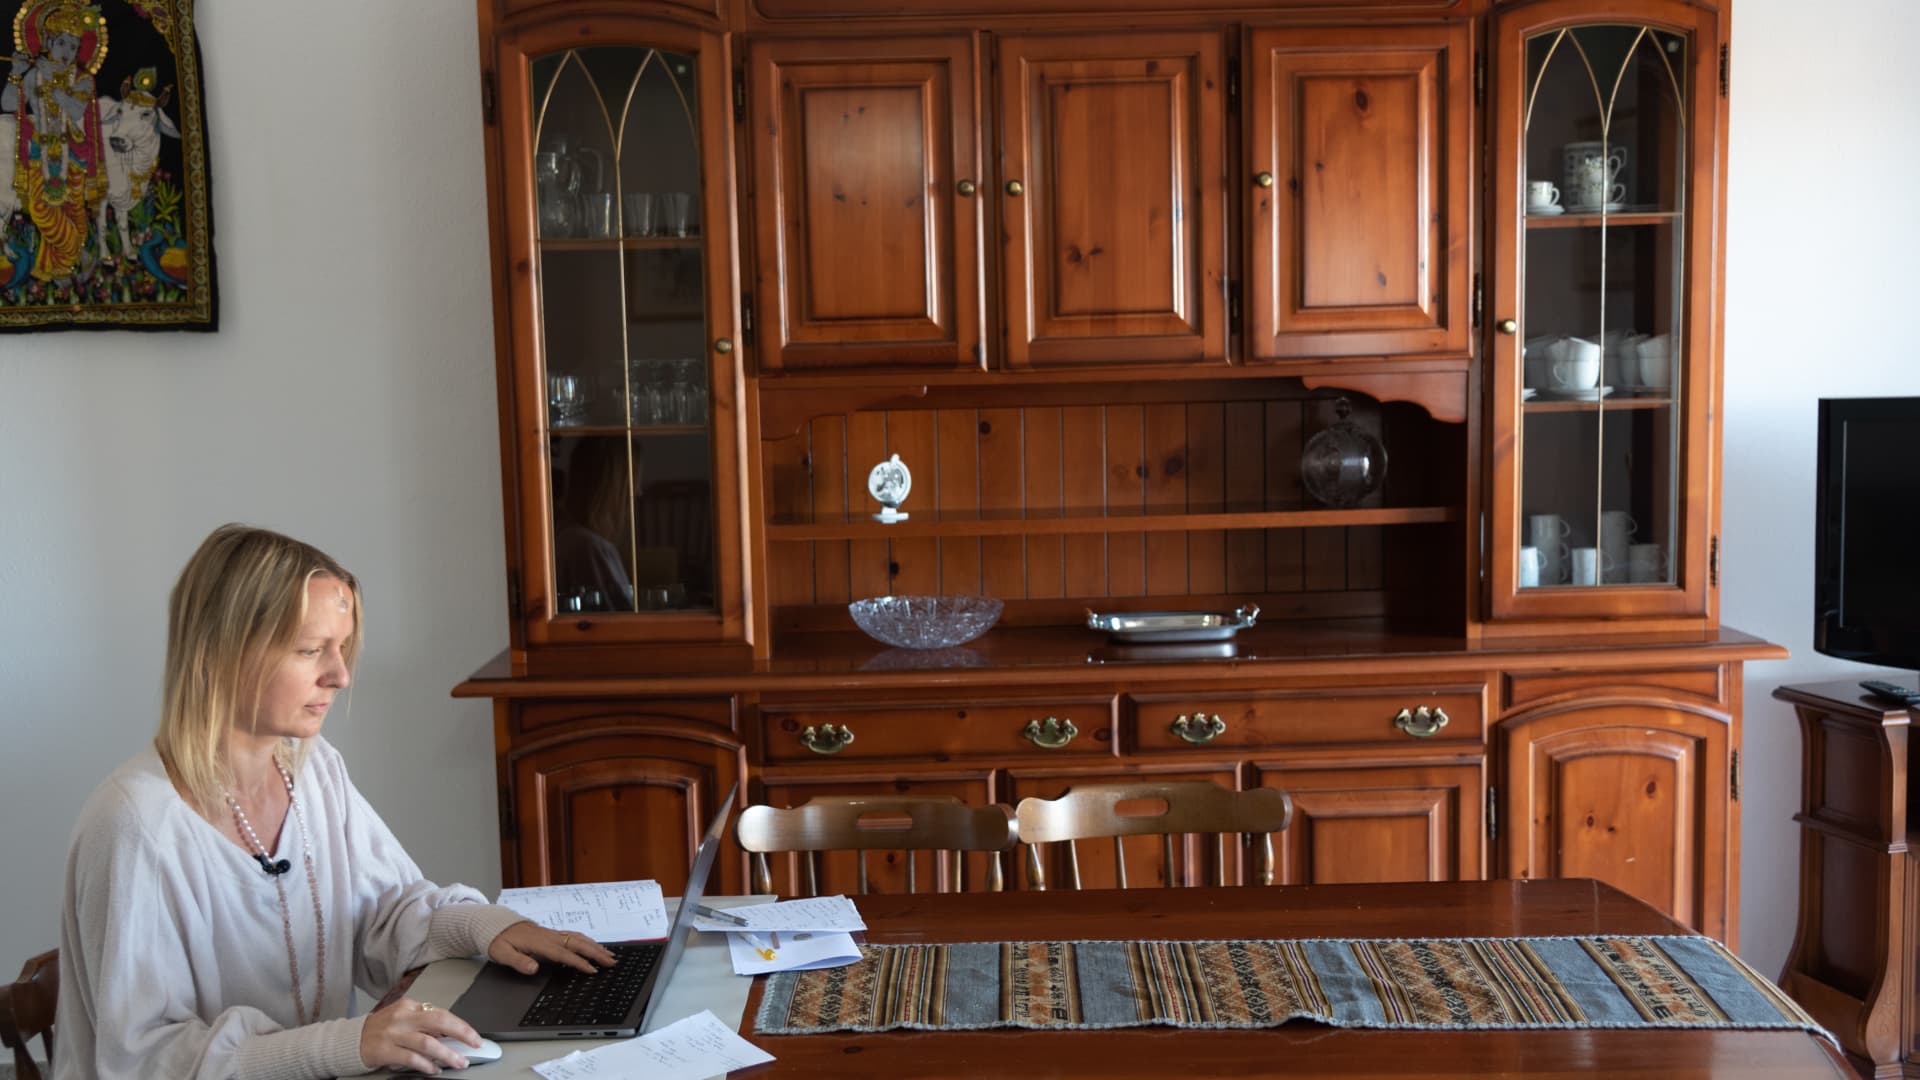 Clarese Partis working from her home in Ollolai, Sardinia.